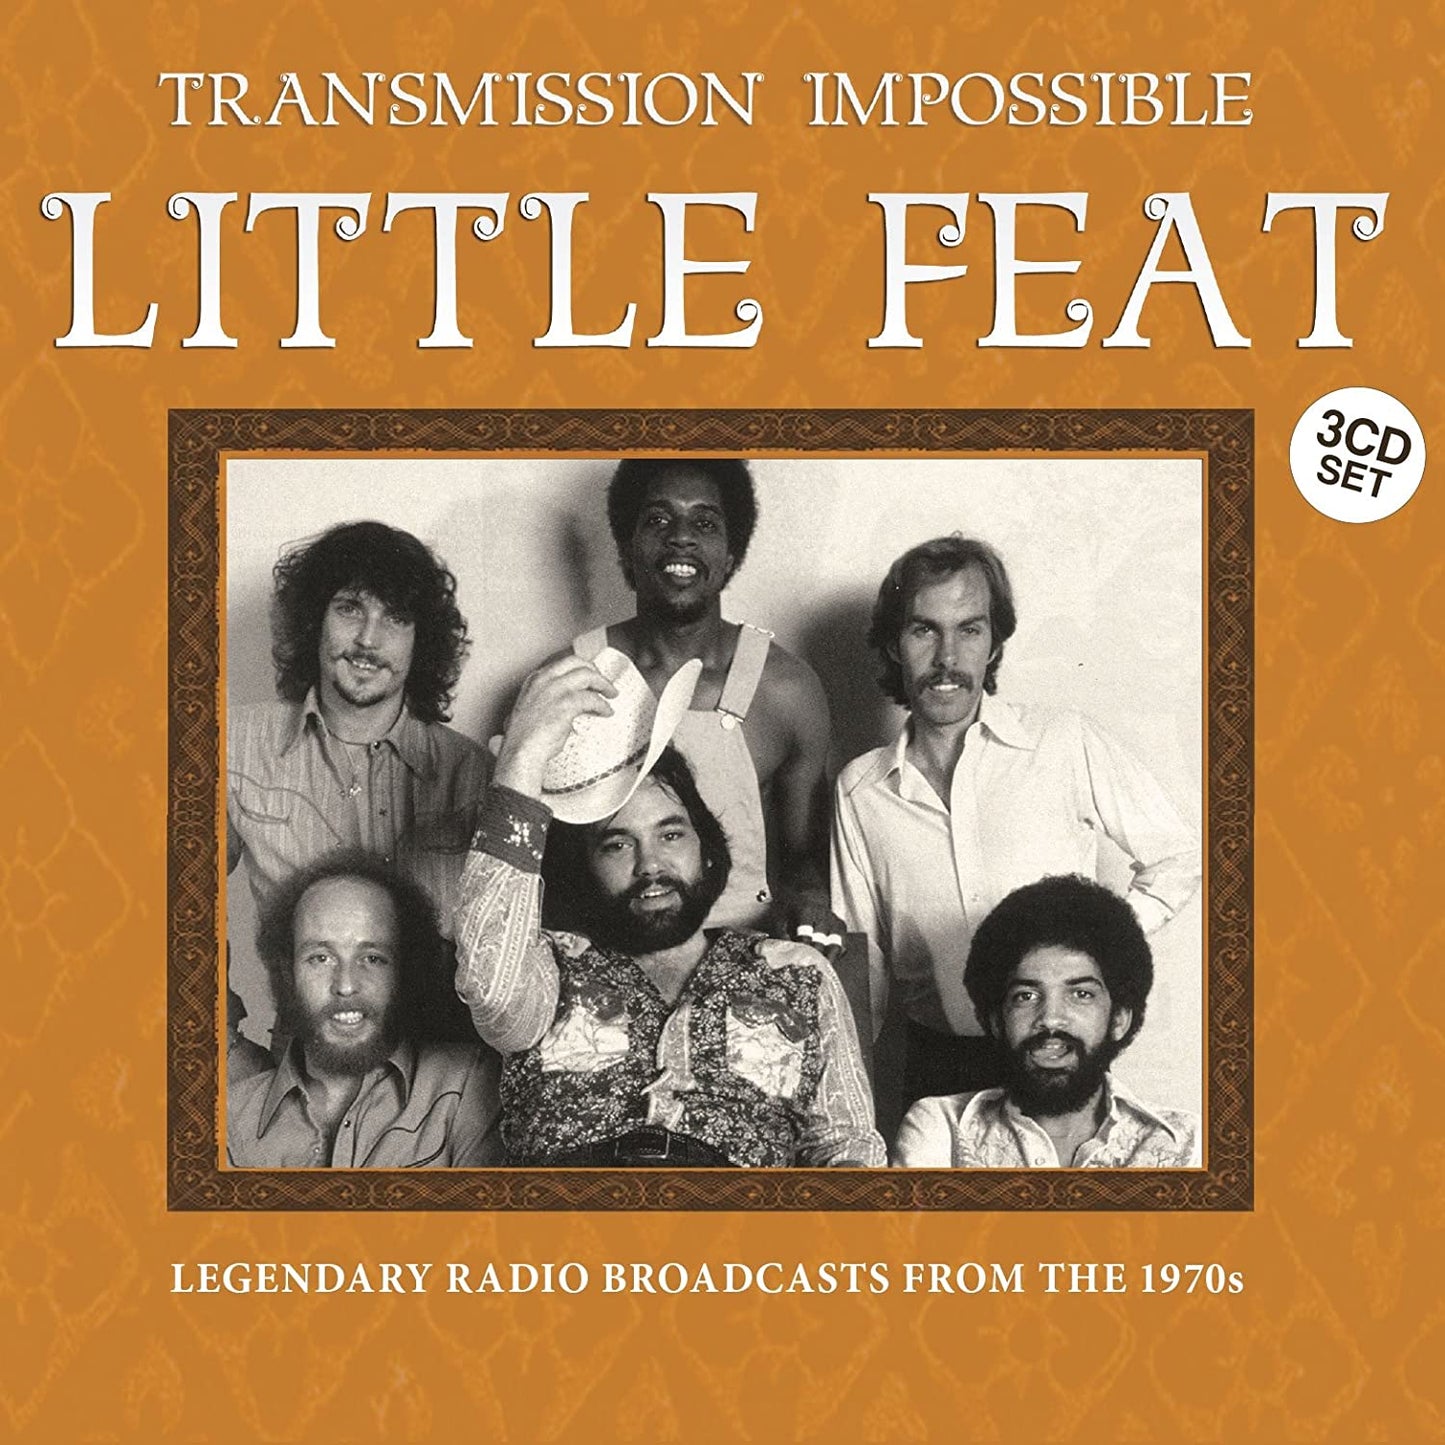 Little Feat - Transmission Impossible - 3CD